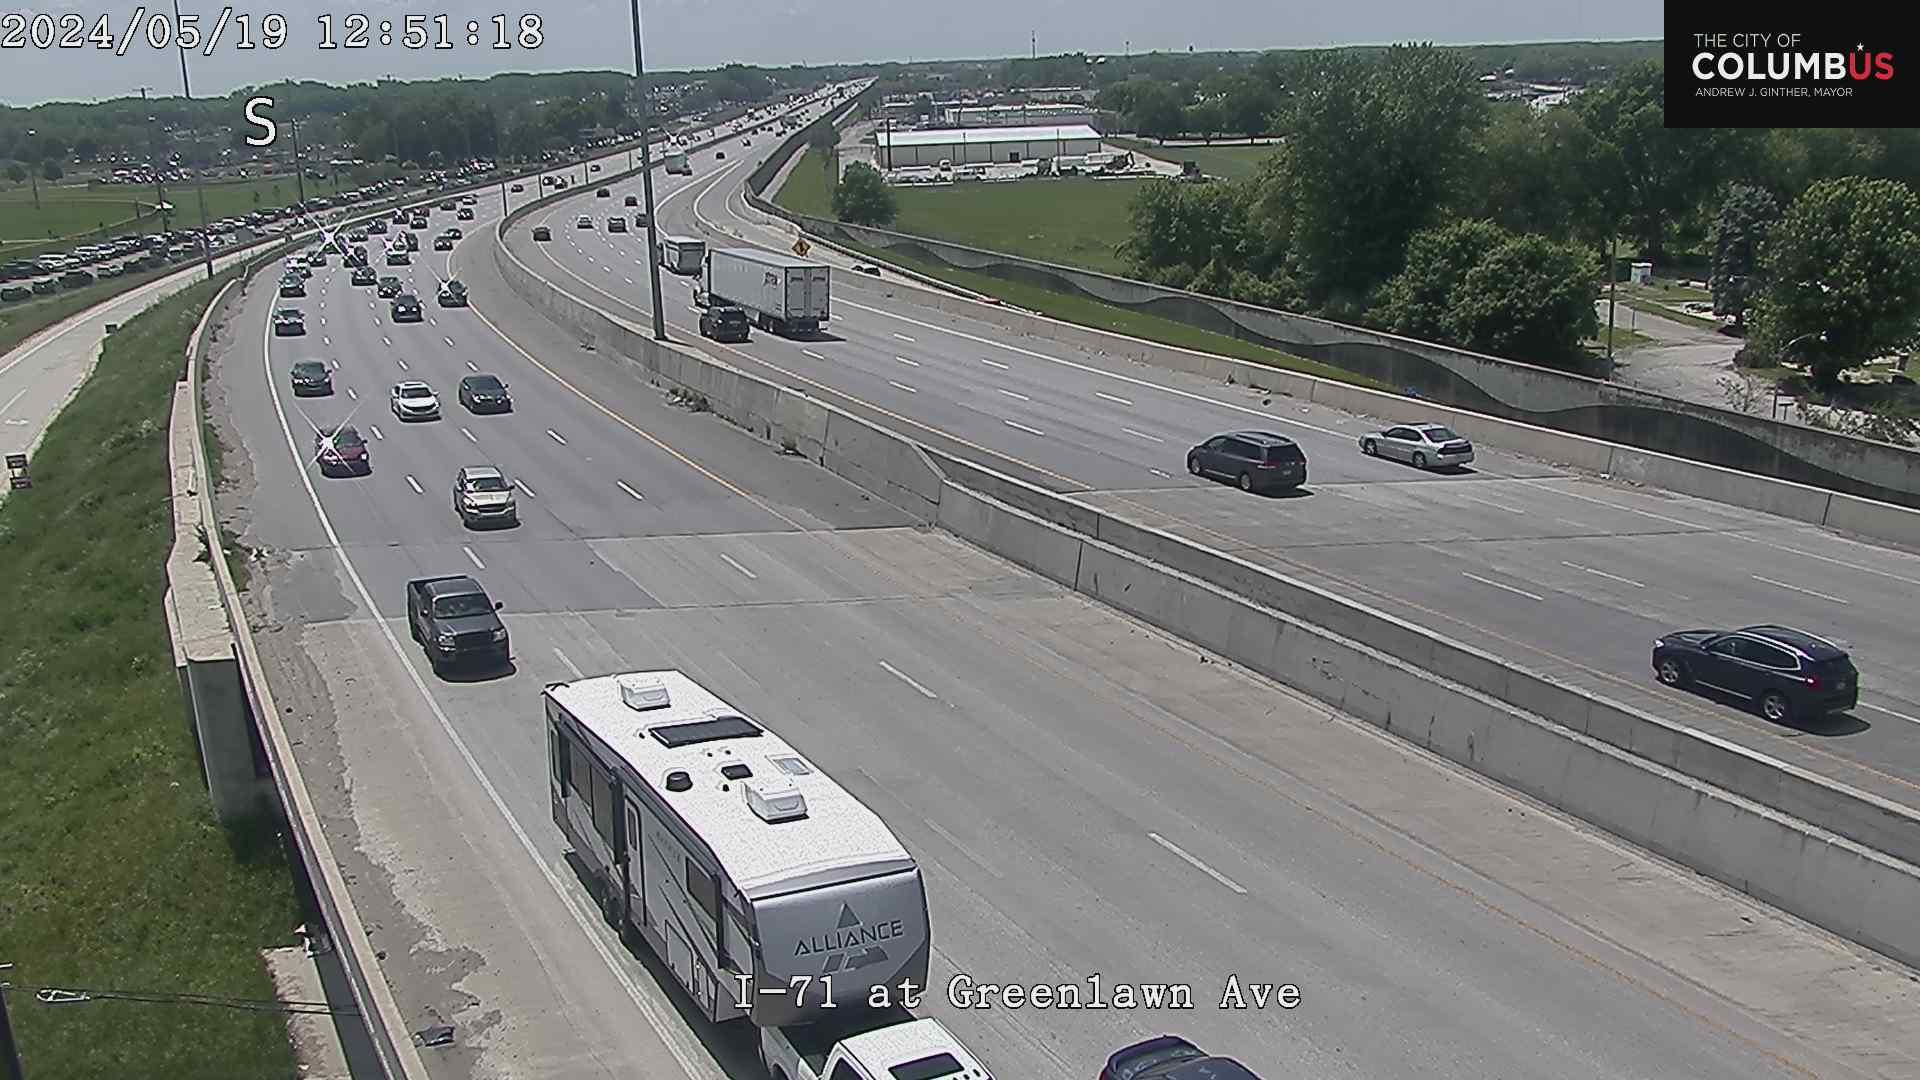 Traffic Cam Columbus: City of - I-71 at Greenlawn Ave